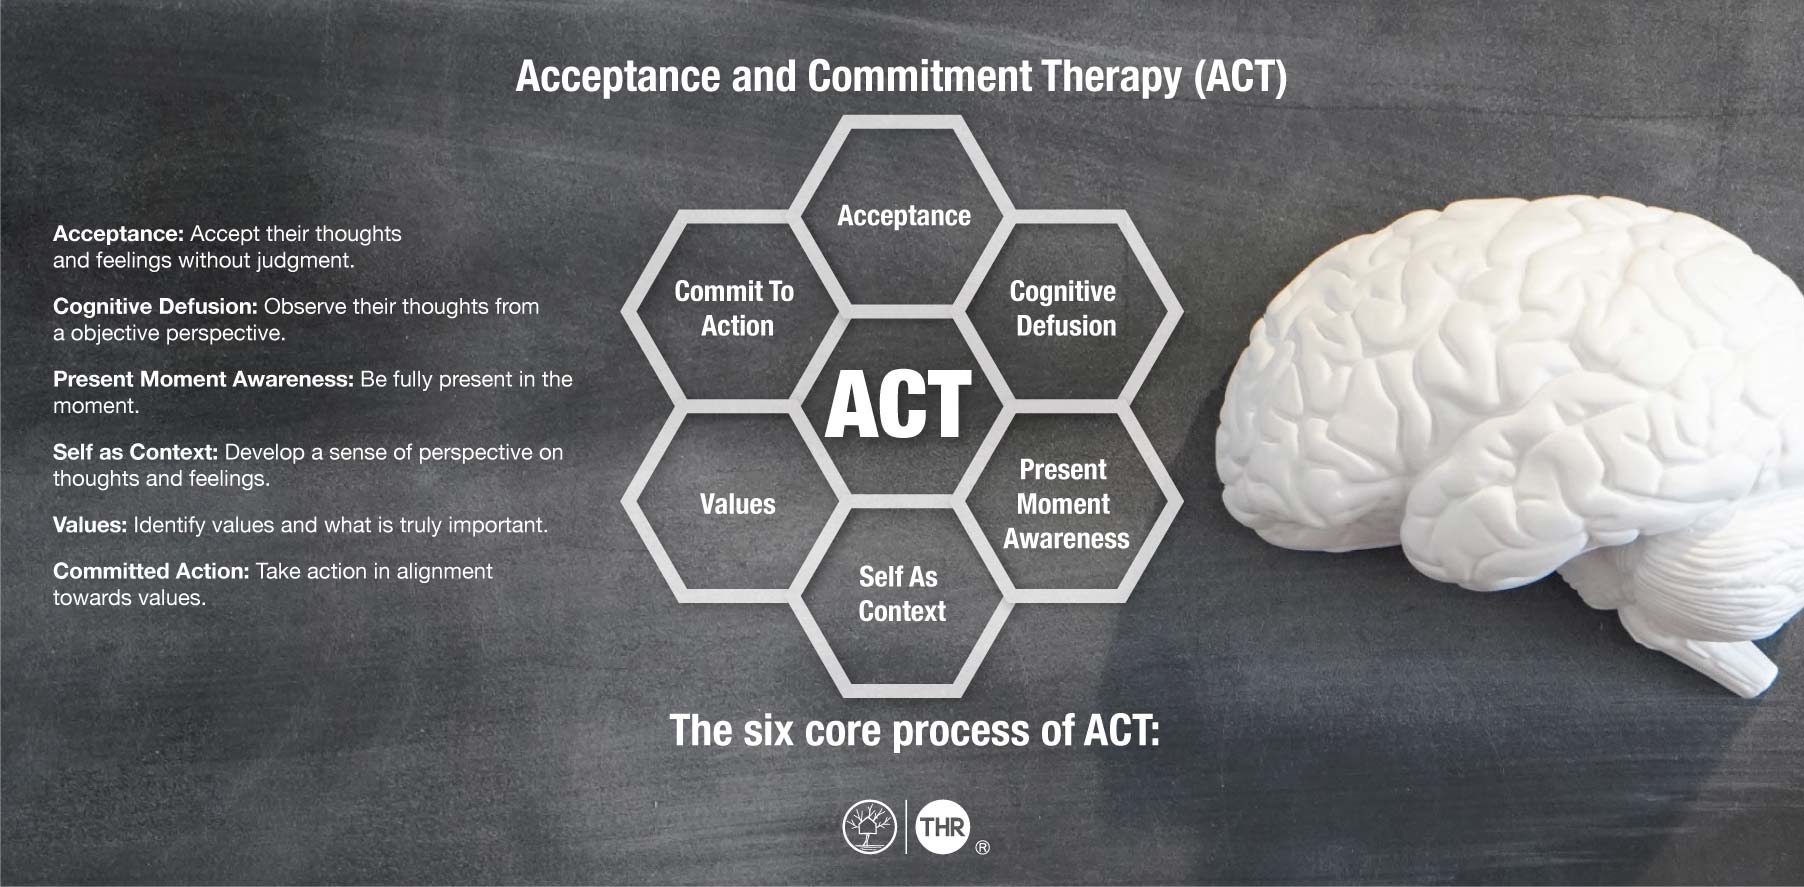 Acceptance-and-Commitment-Therapy-(ACT)-Illustration showing the connection of the six core process: 1. Acceptance: Accept their thoughts and feelings without judgment. 2. Cognitive Defusion: Observe their thoughts from a objective perspective. 3. Present Moment Awareness: Be fully present in the moment. 4. Self as Context: Develop a sense of perspective on thoughts and feelings. 5. Values: Identify values and what is truly important. 6. Committed Action: Take action in alignment towards values.